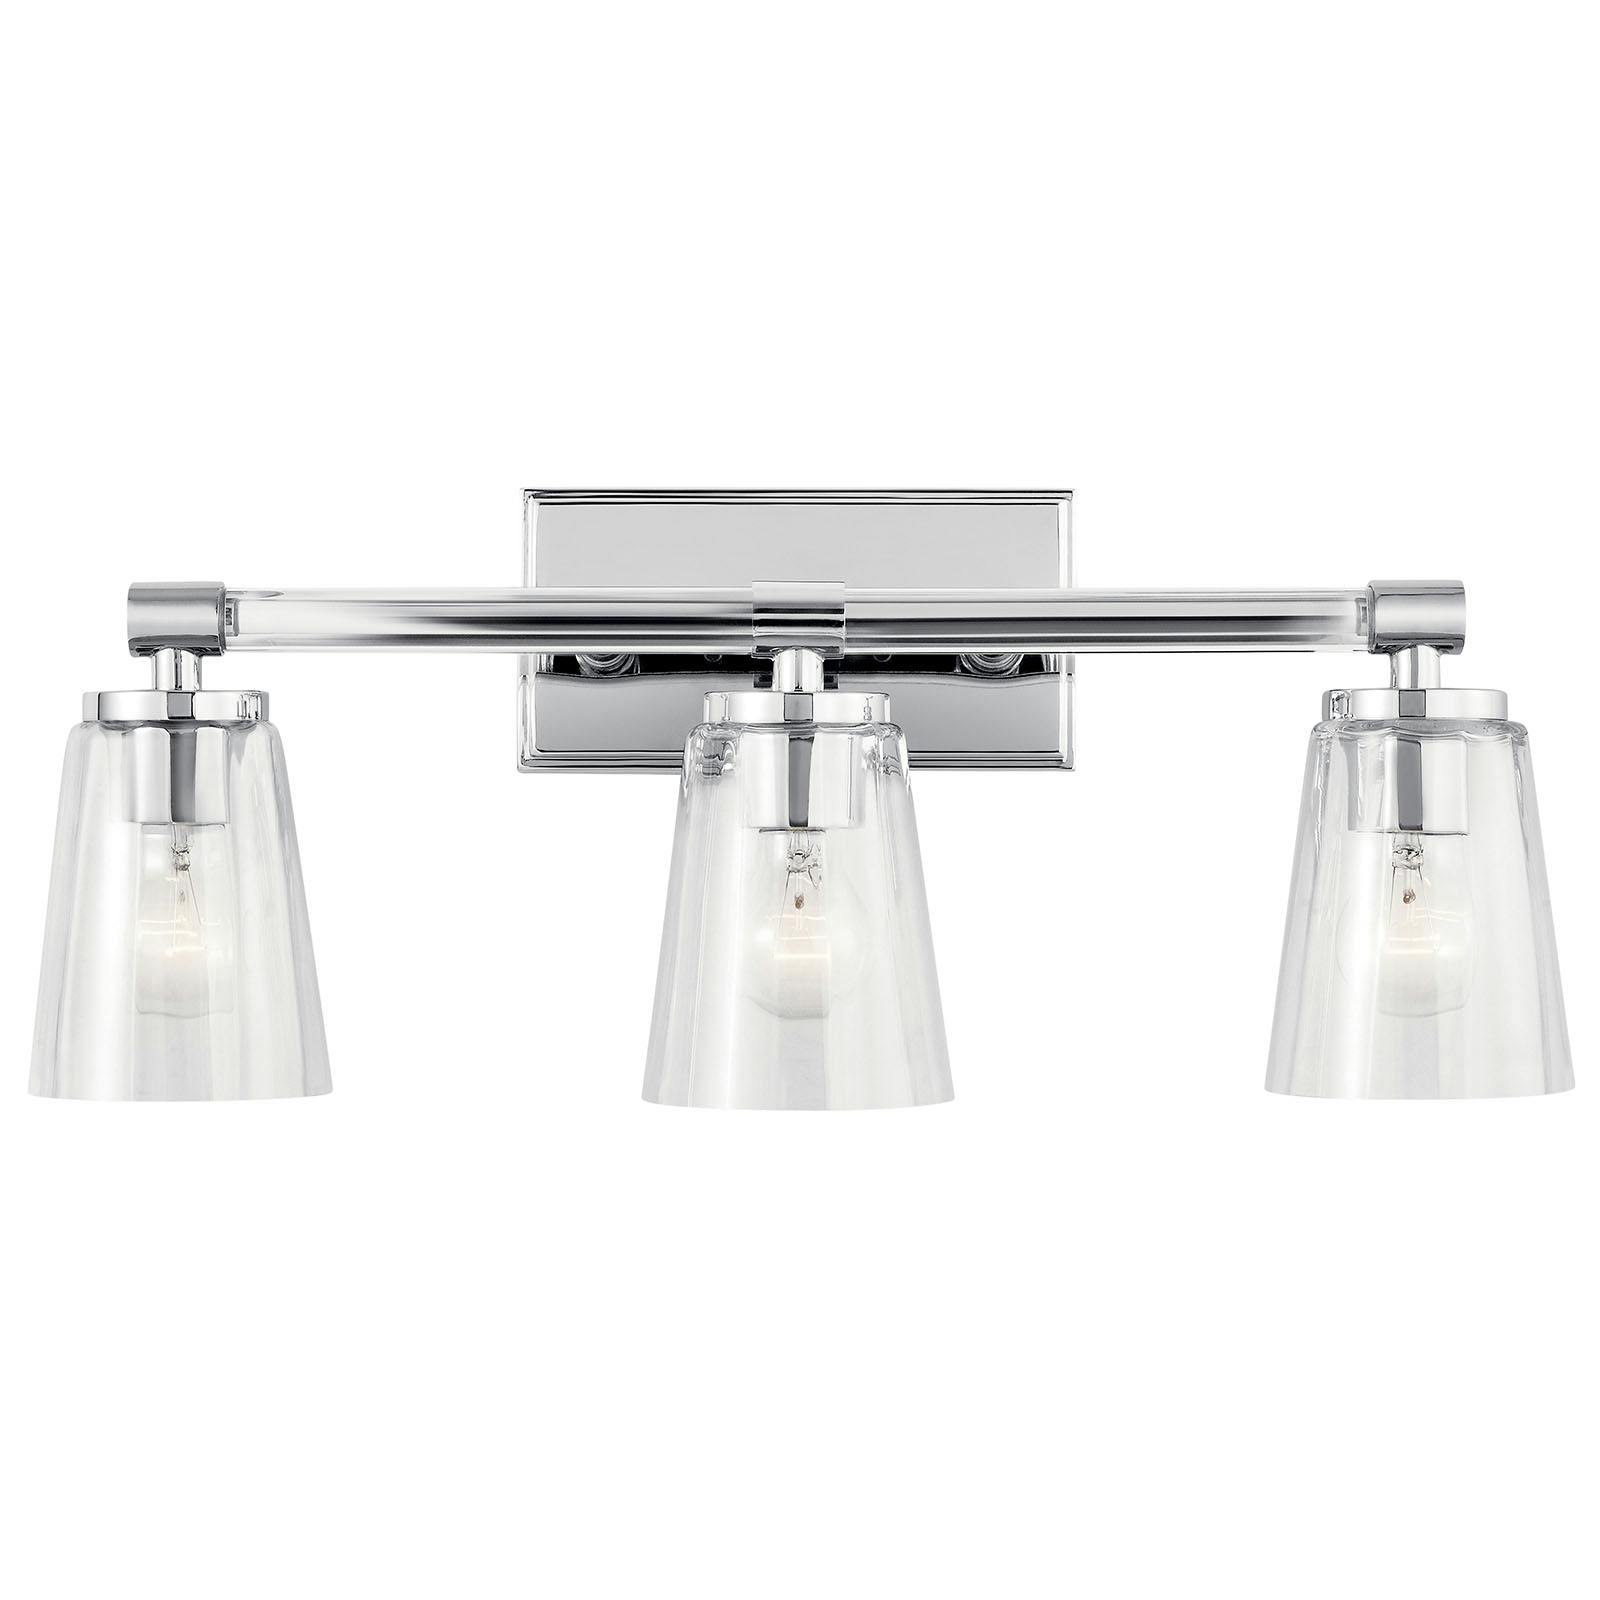 The Audrea™ 3 Light Vanity Light Chrome facing down on a white background